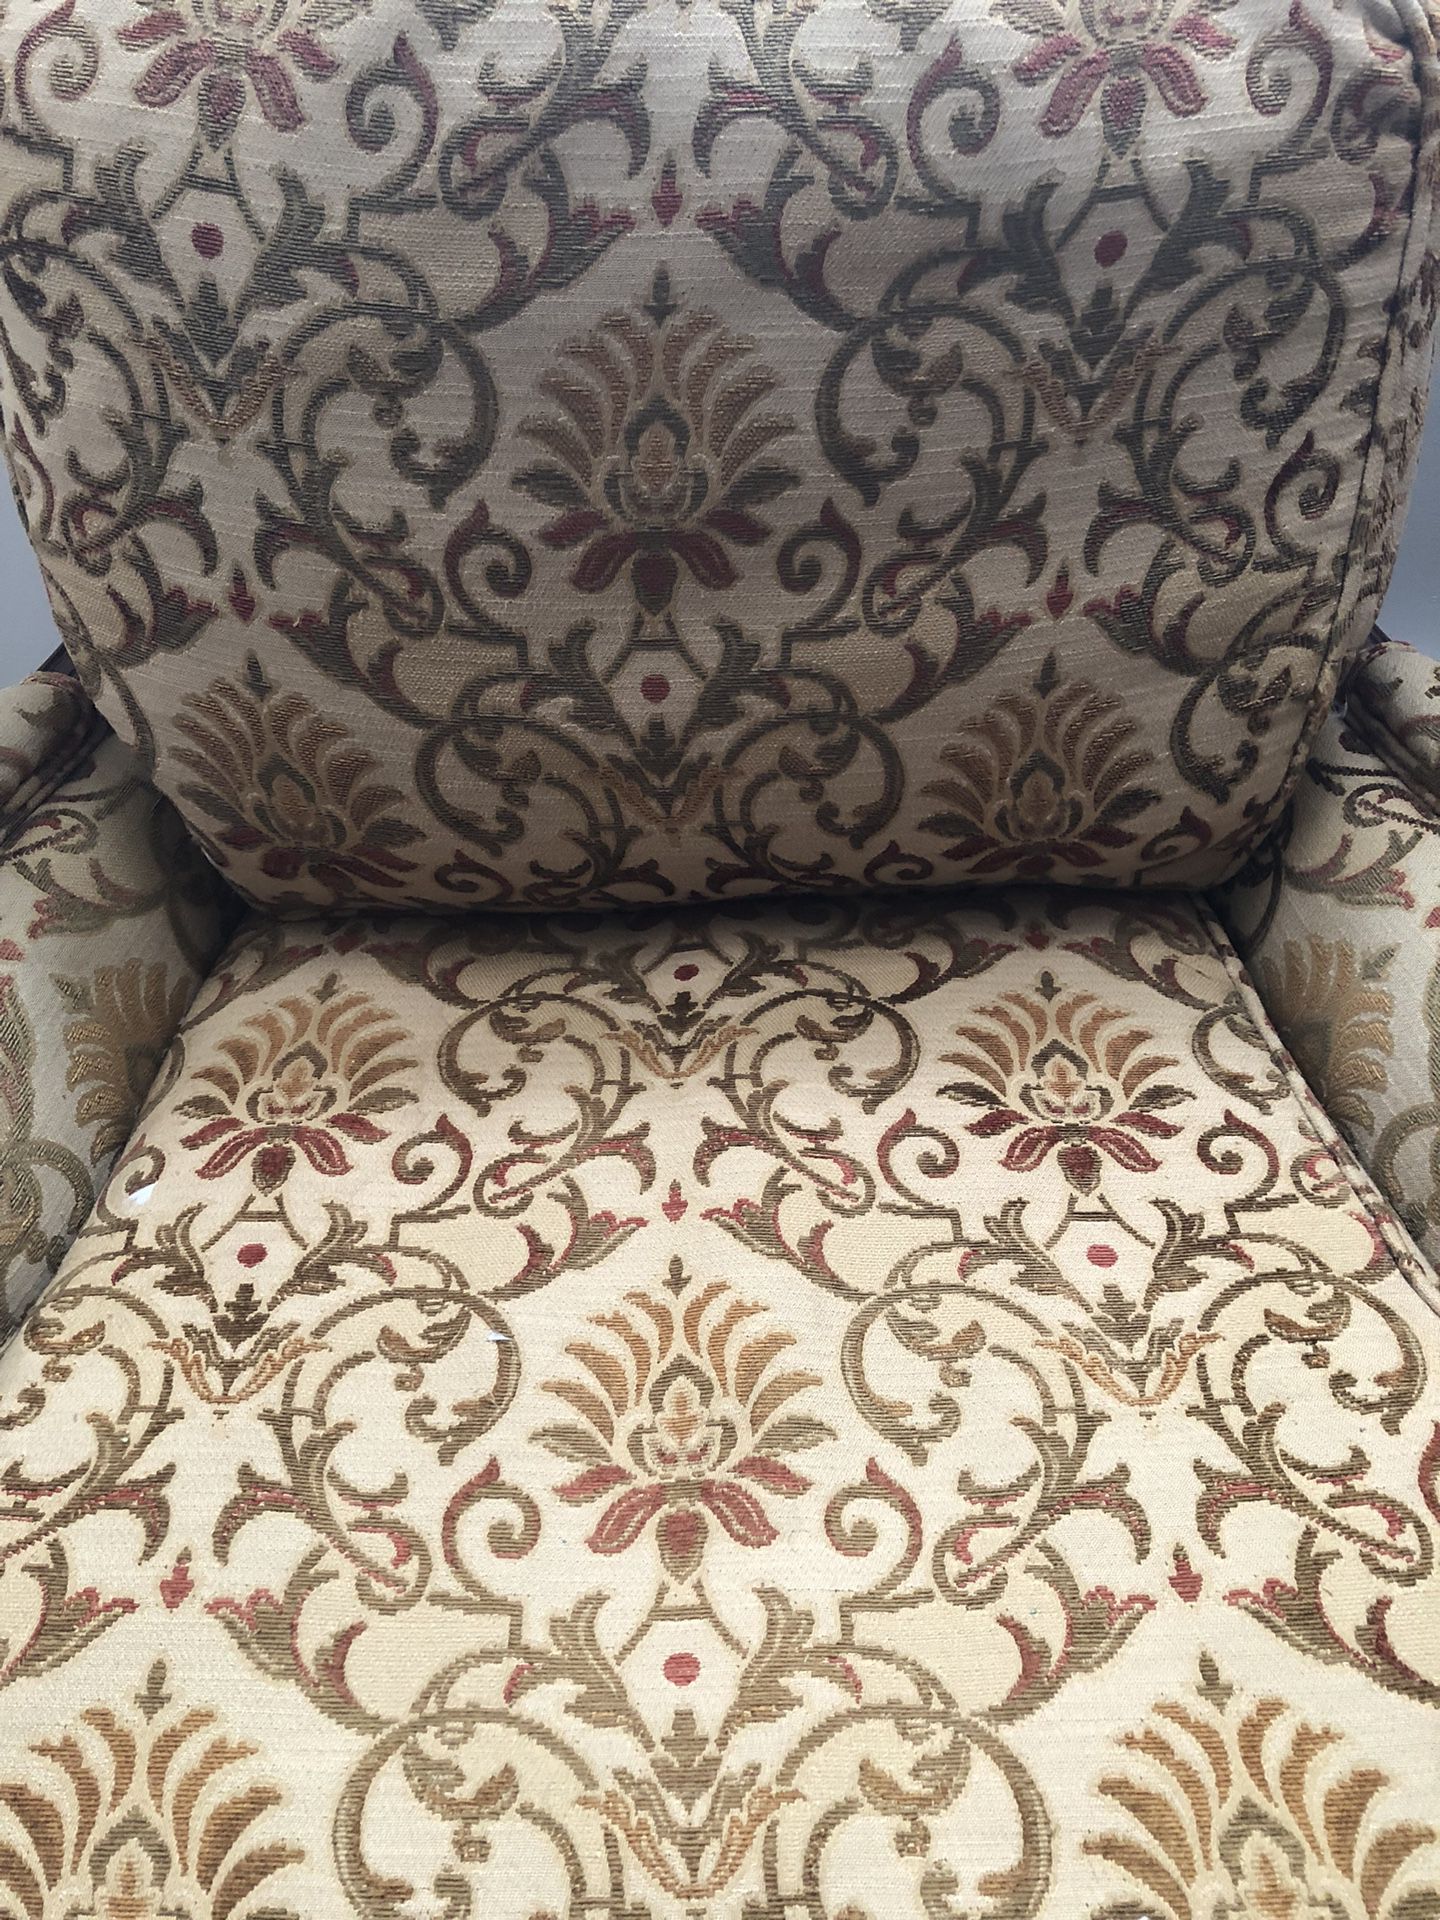 Antique Comfortable Reading chair 